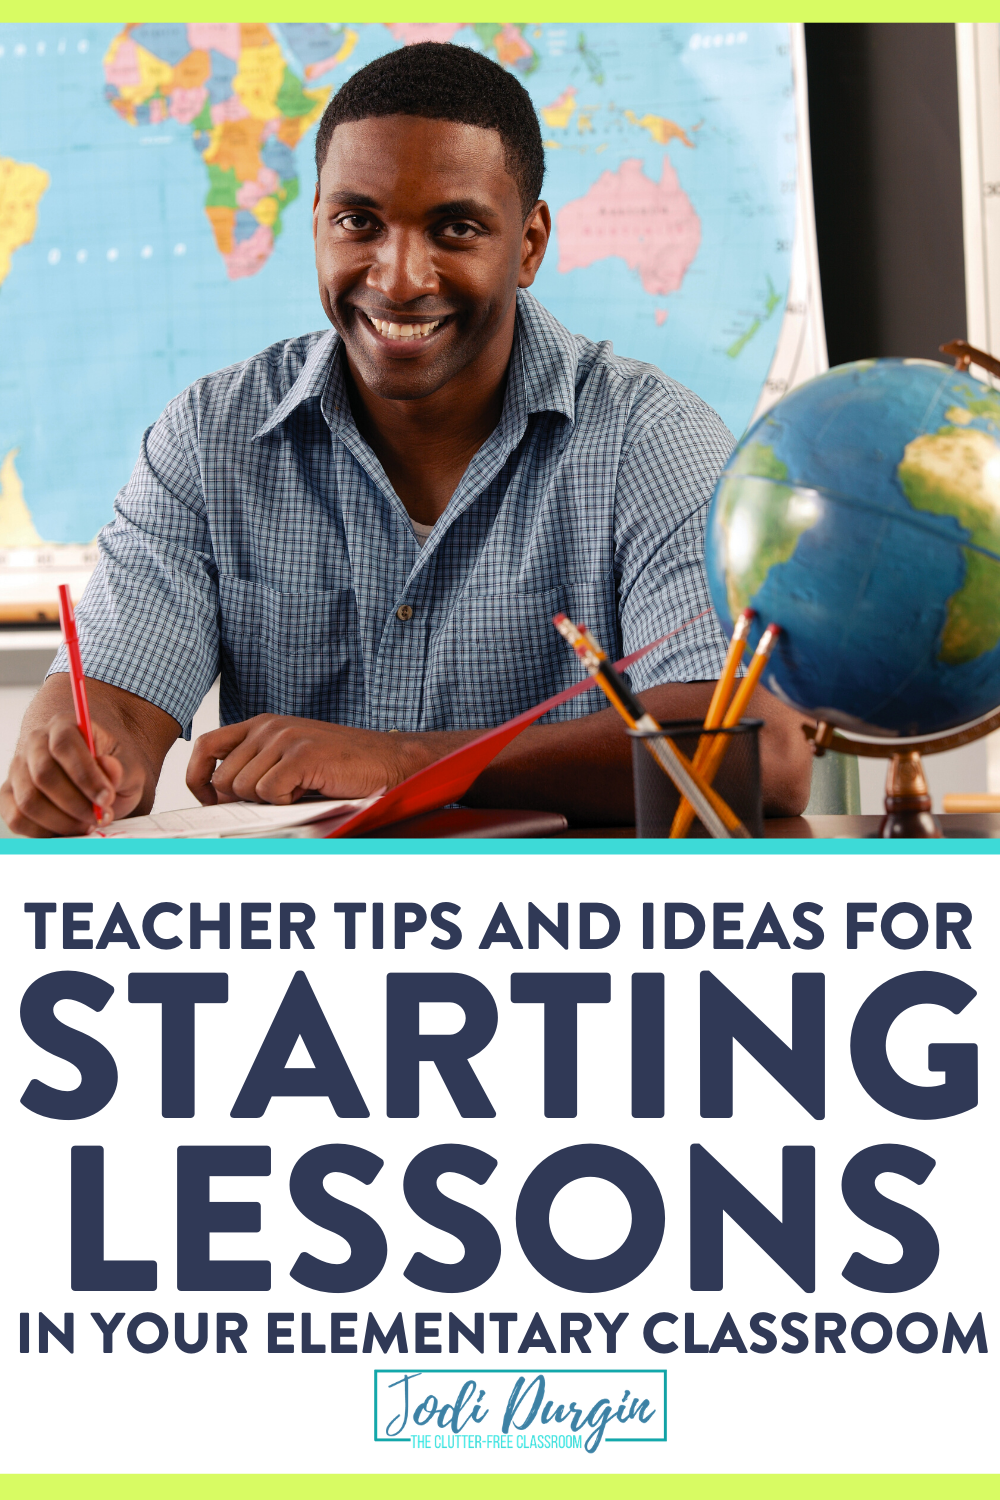 Learn what do now activities are and why elementary classroom teachers should use them daily. These lesson starter activities include bell ringers and do nows, which also work well for morning work in 1st, 2nd, 3rd, 4th, and 5th grade classrooms. Read the blog post now!  #donow #donowactivities #bellringer #bellringeractivities #bellringers #donows #elementaryclassroom #morningwork